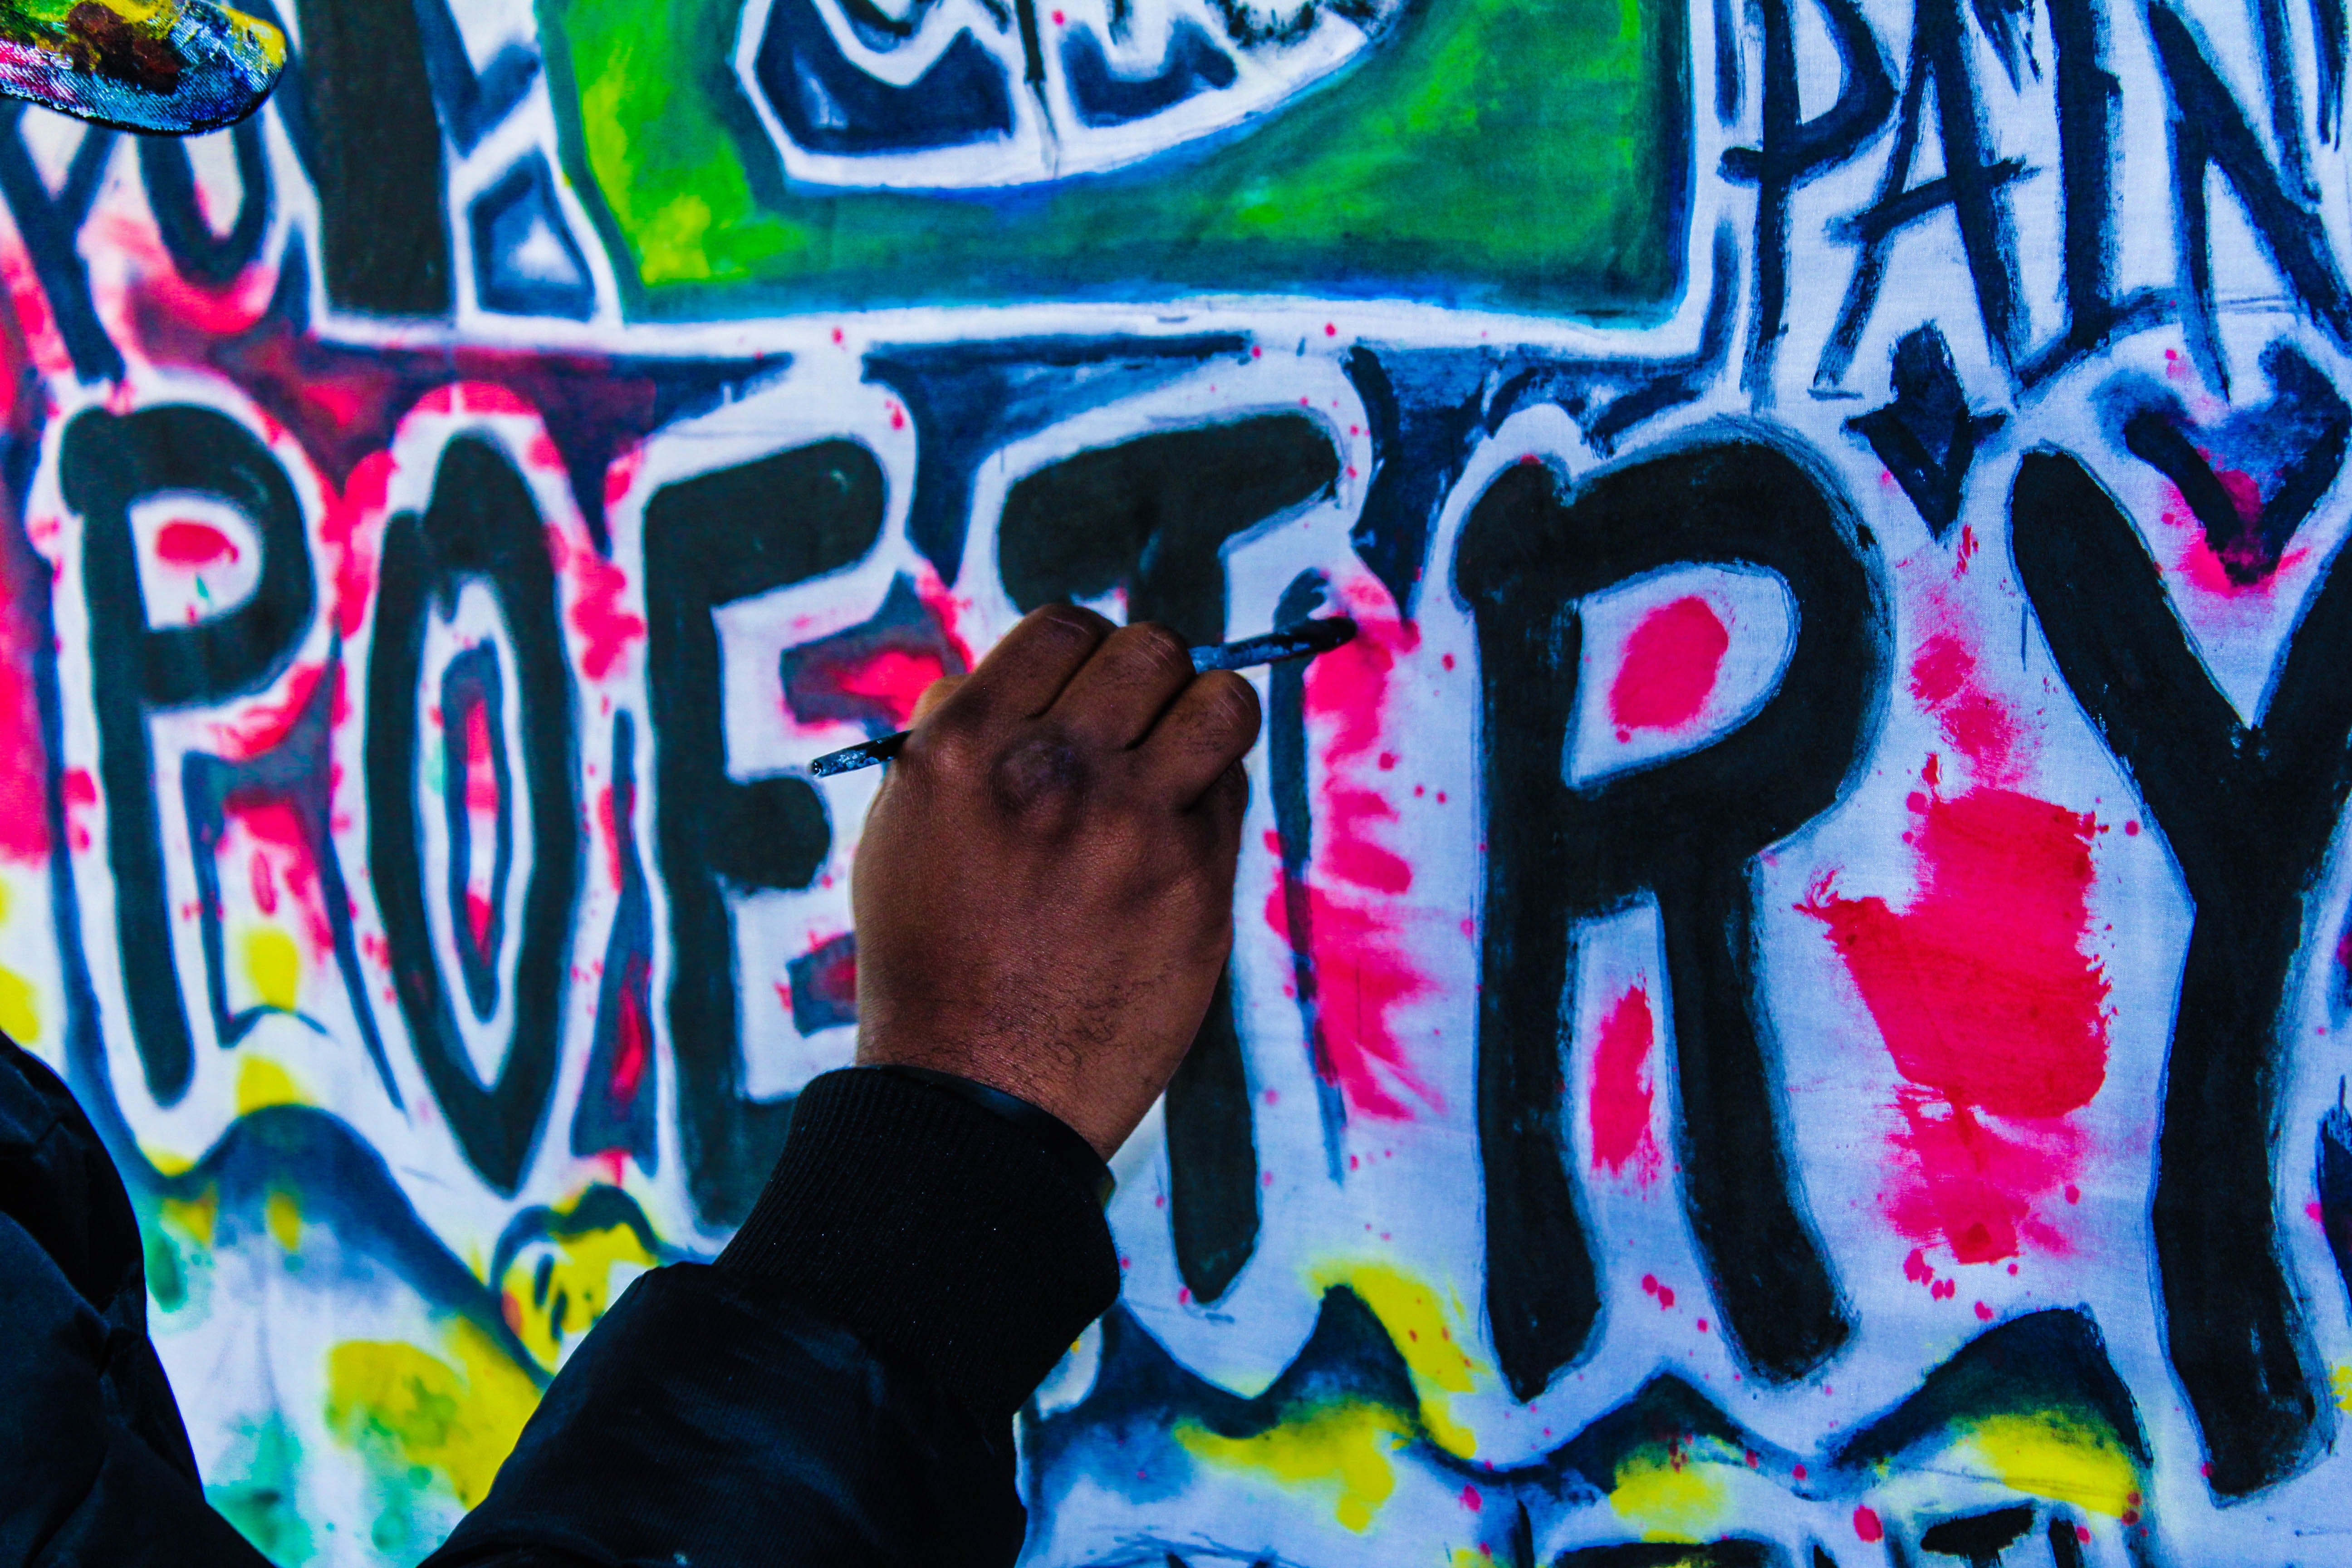 Raised fist in front of a wall with "Poetry" written in colorful lettering.